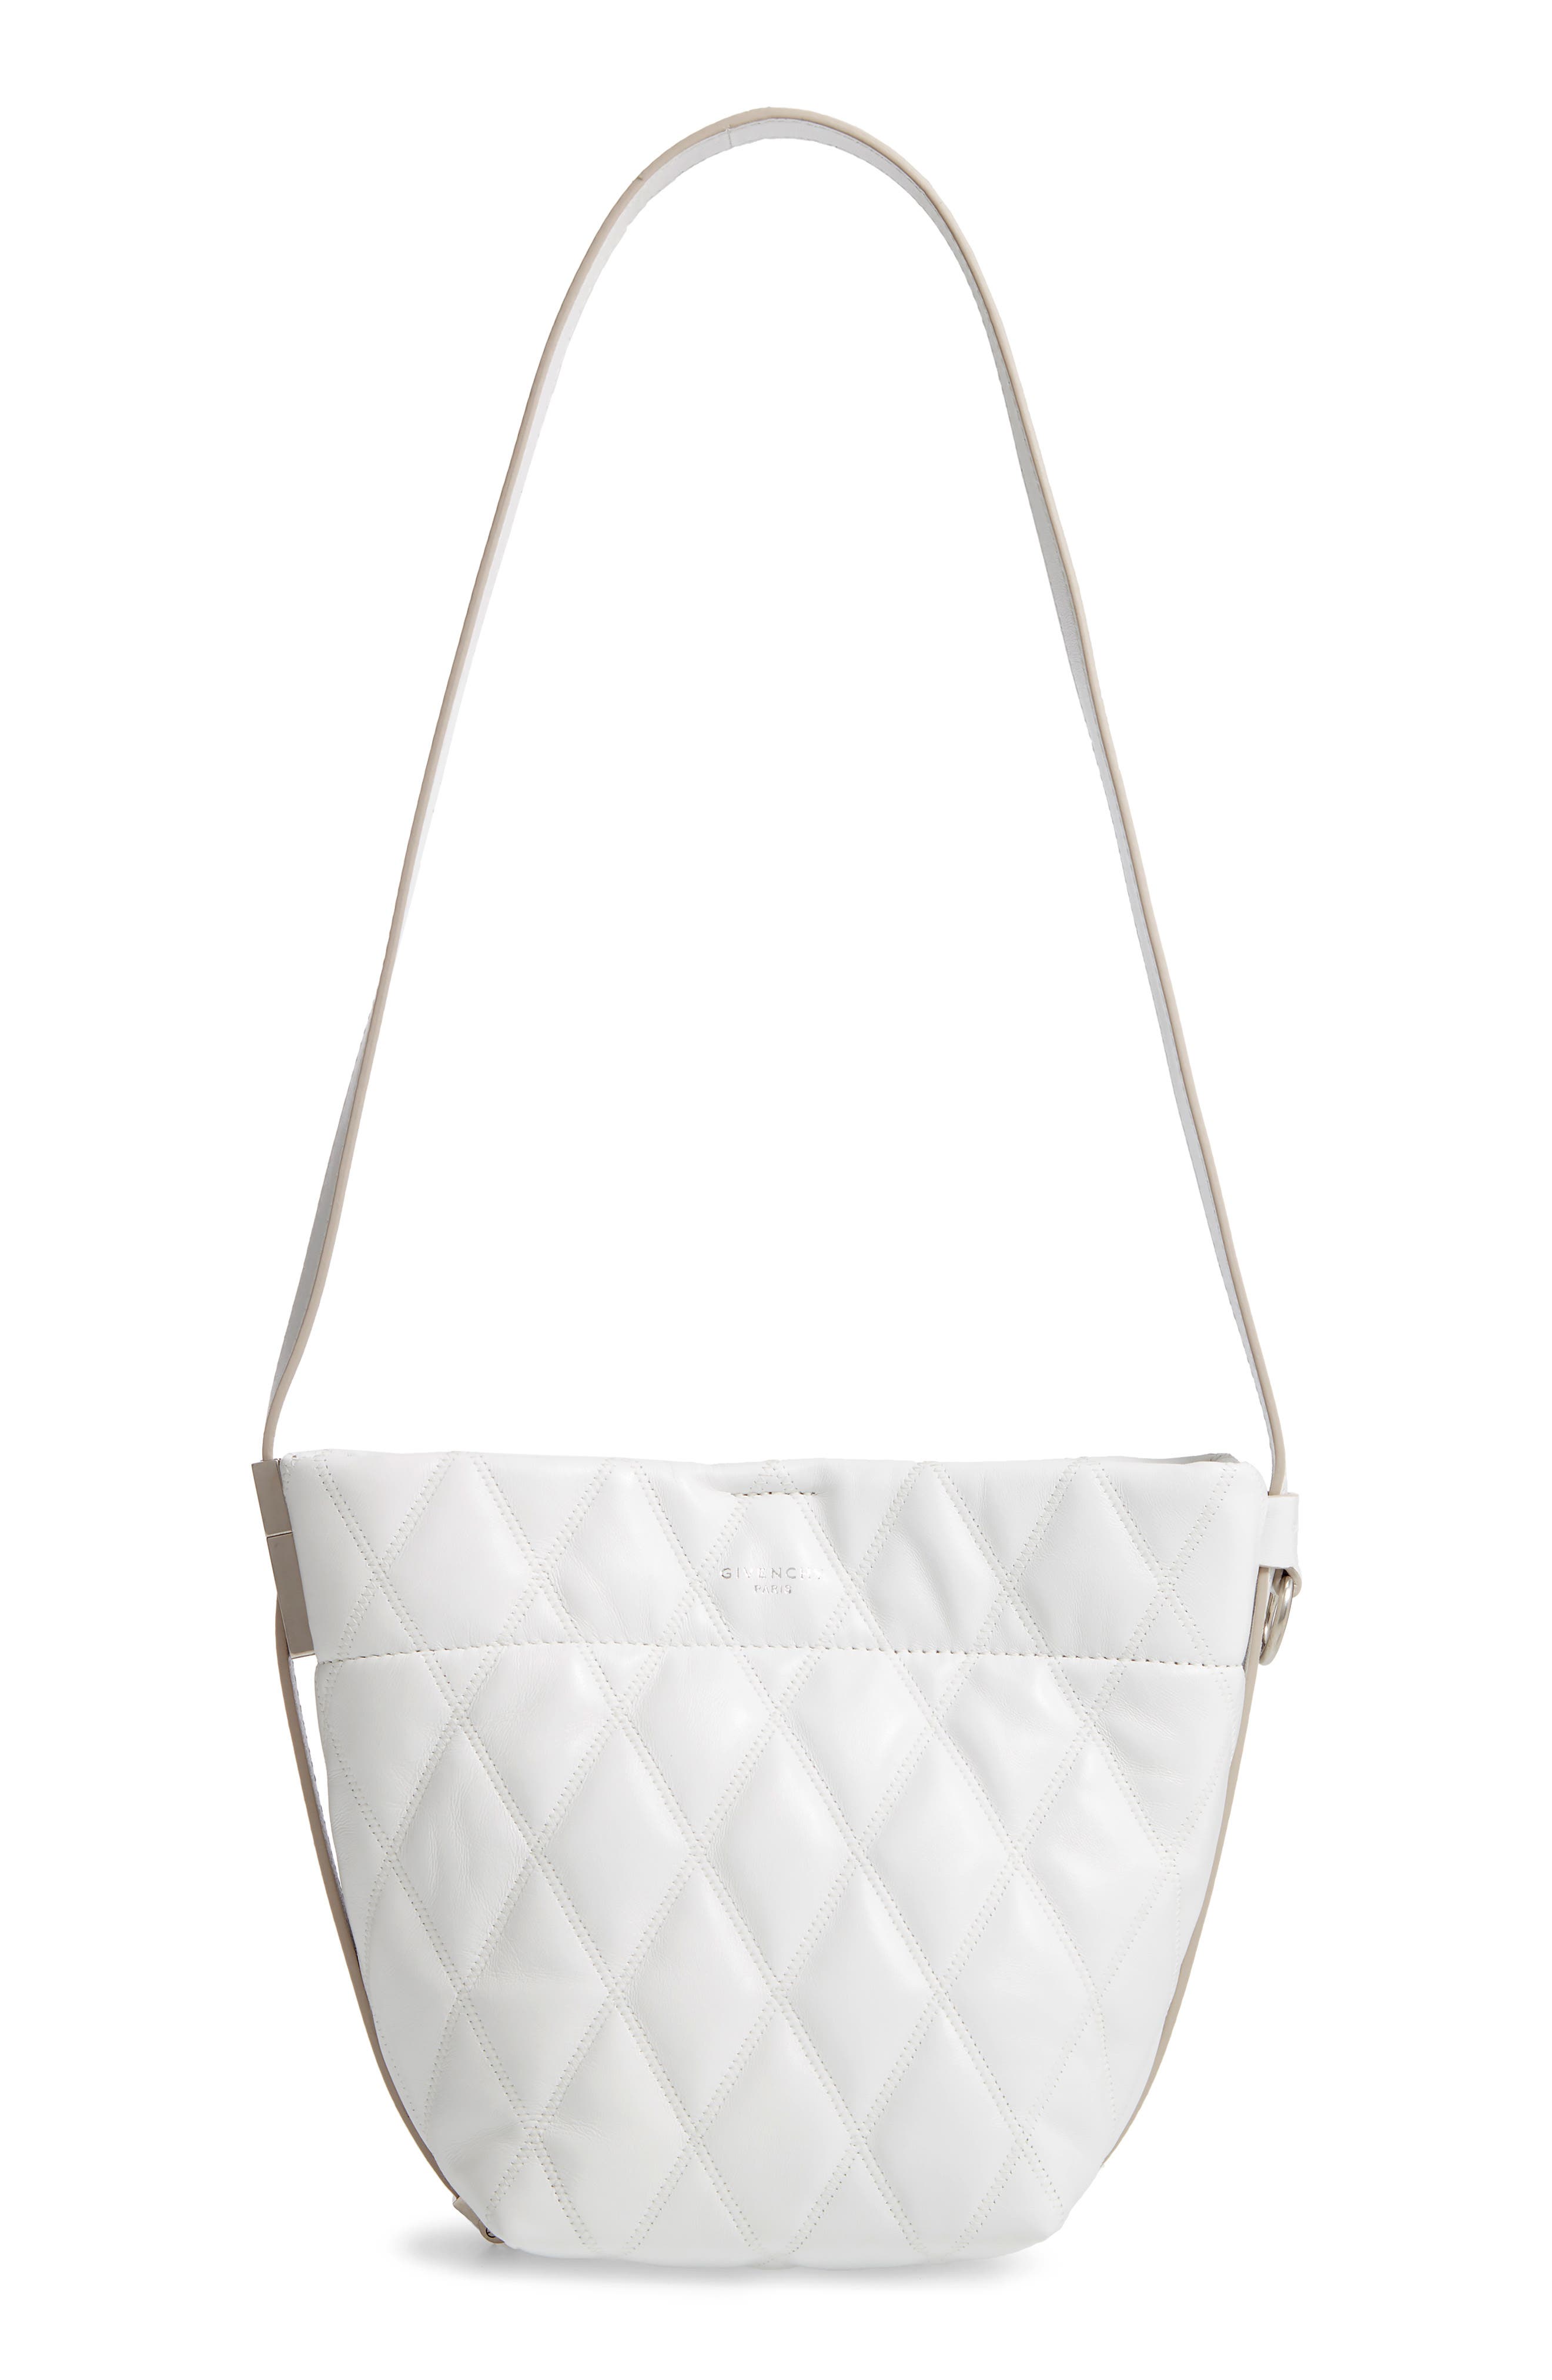 givenchy gv quilted mini bucket bag